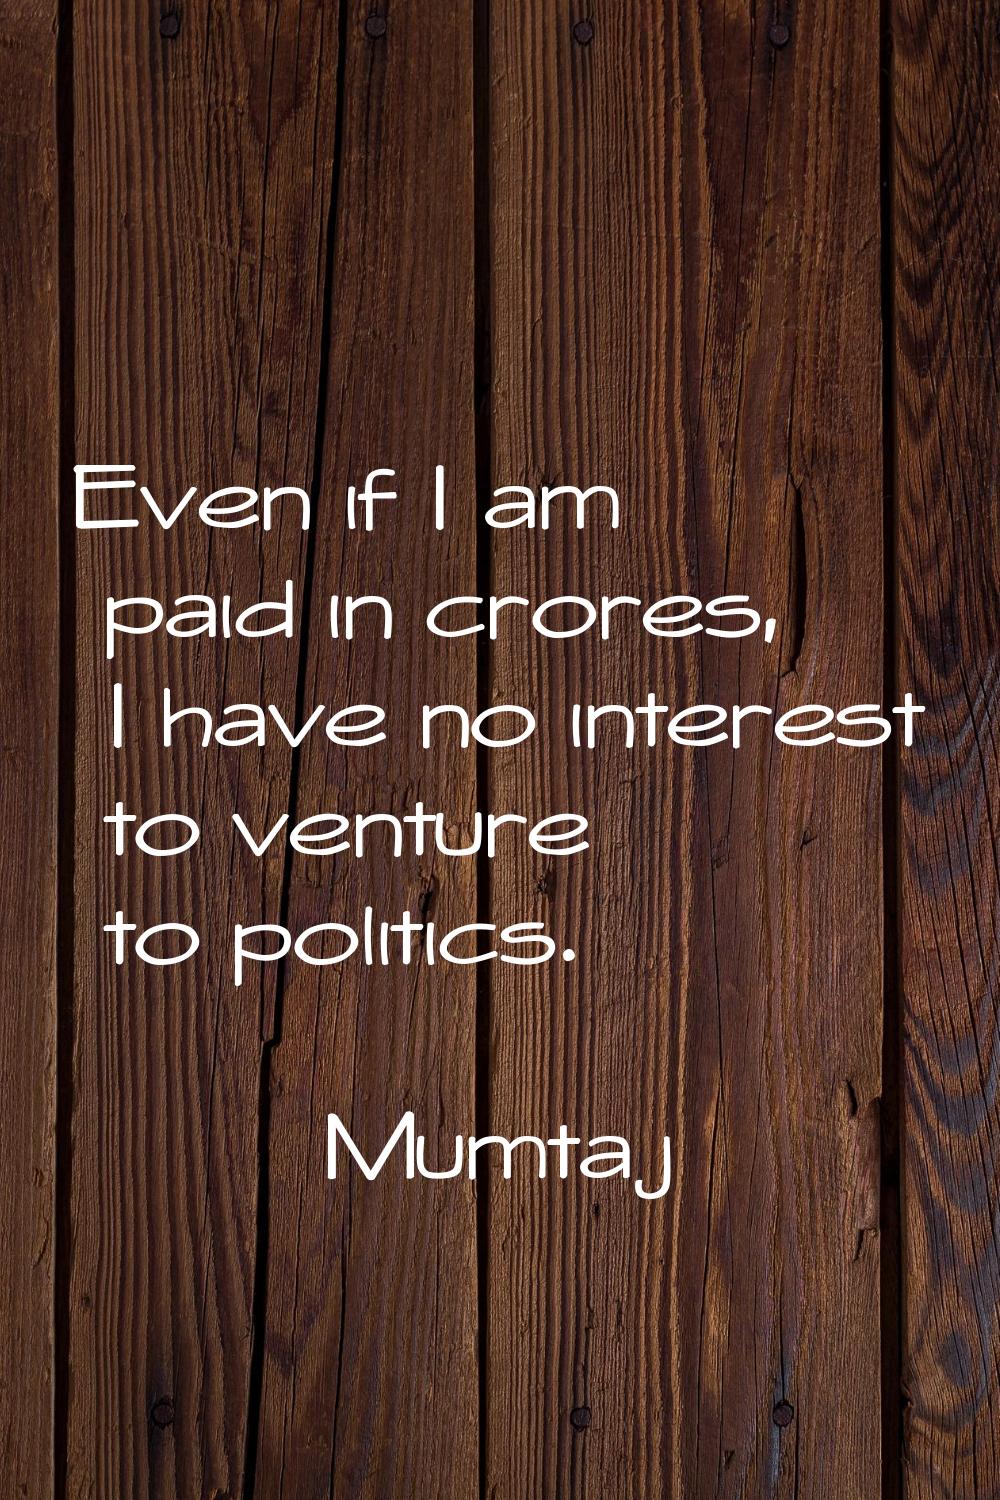 Even if I am paid in crores, I have no interest to venture to politics.